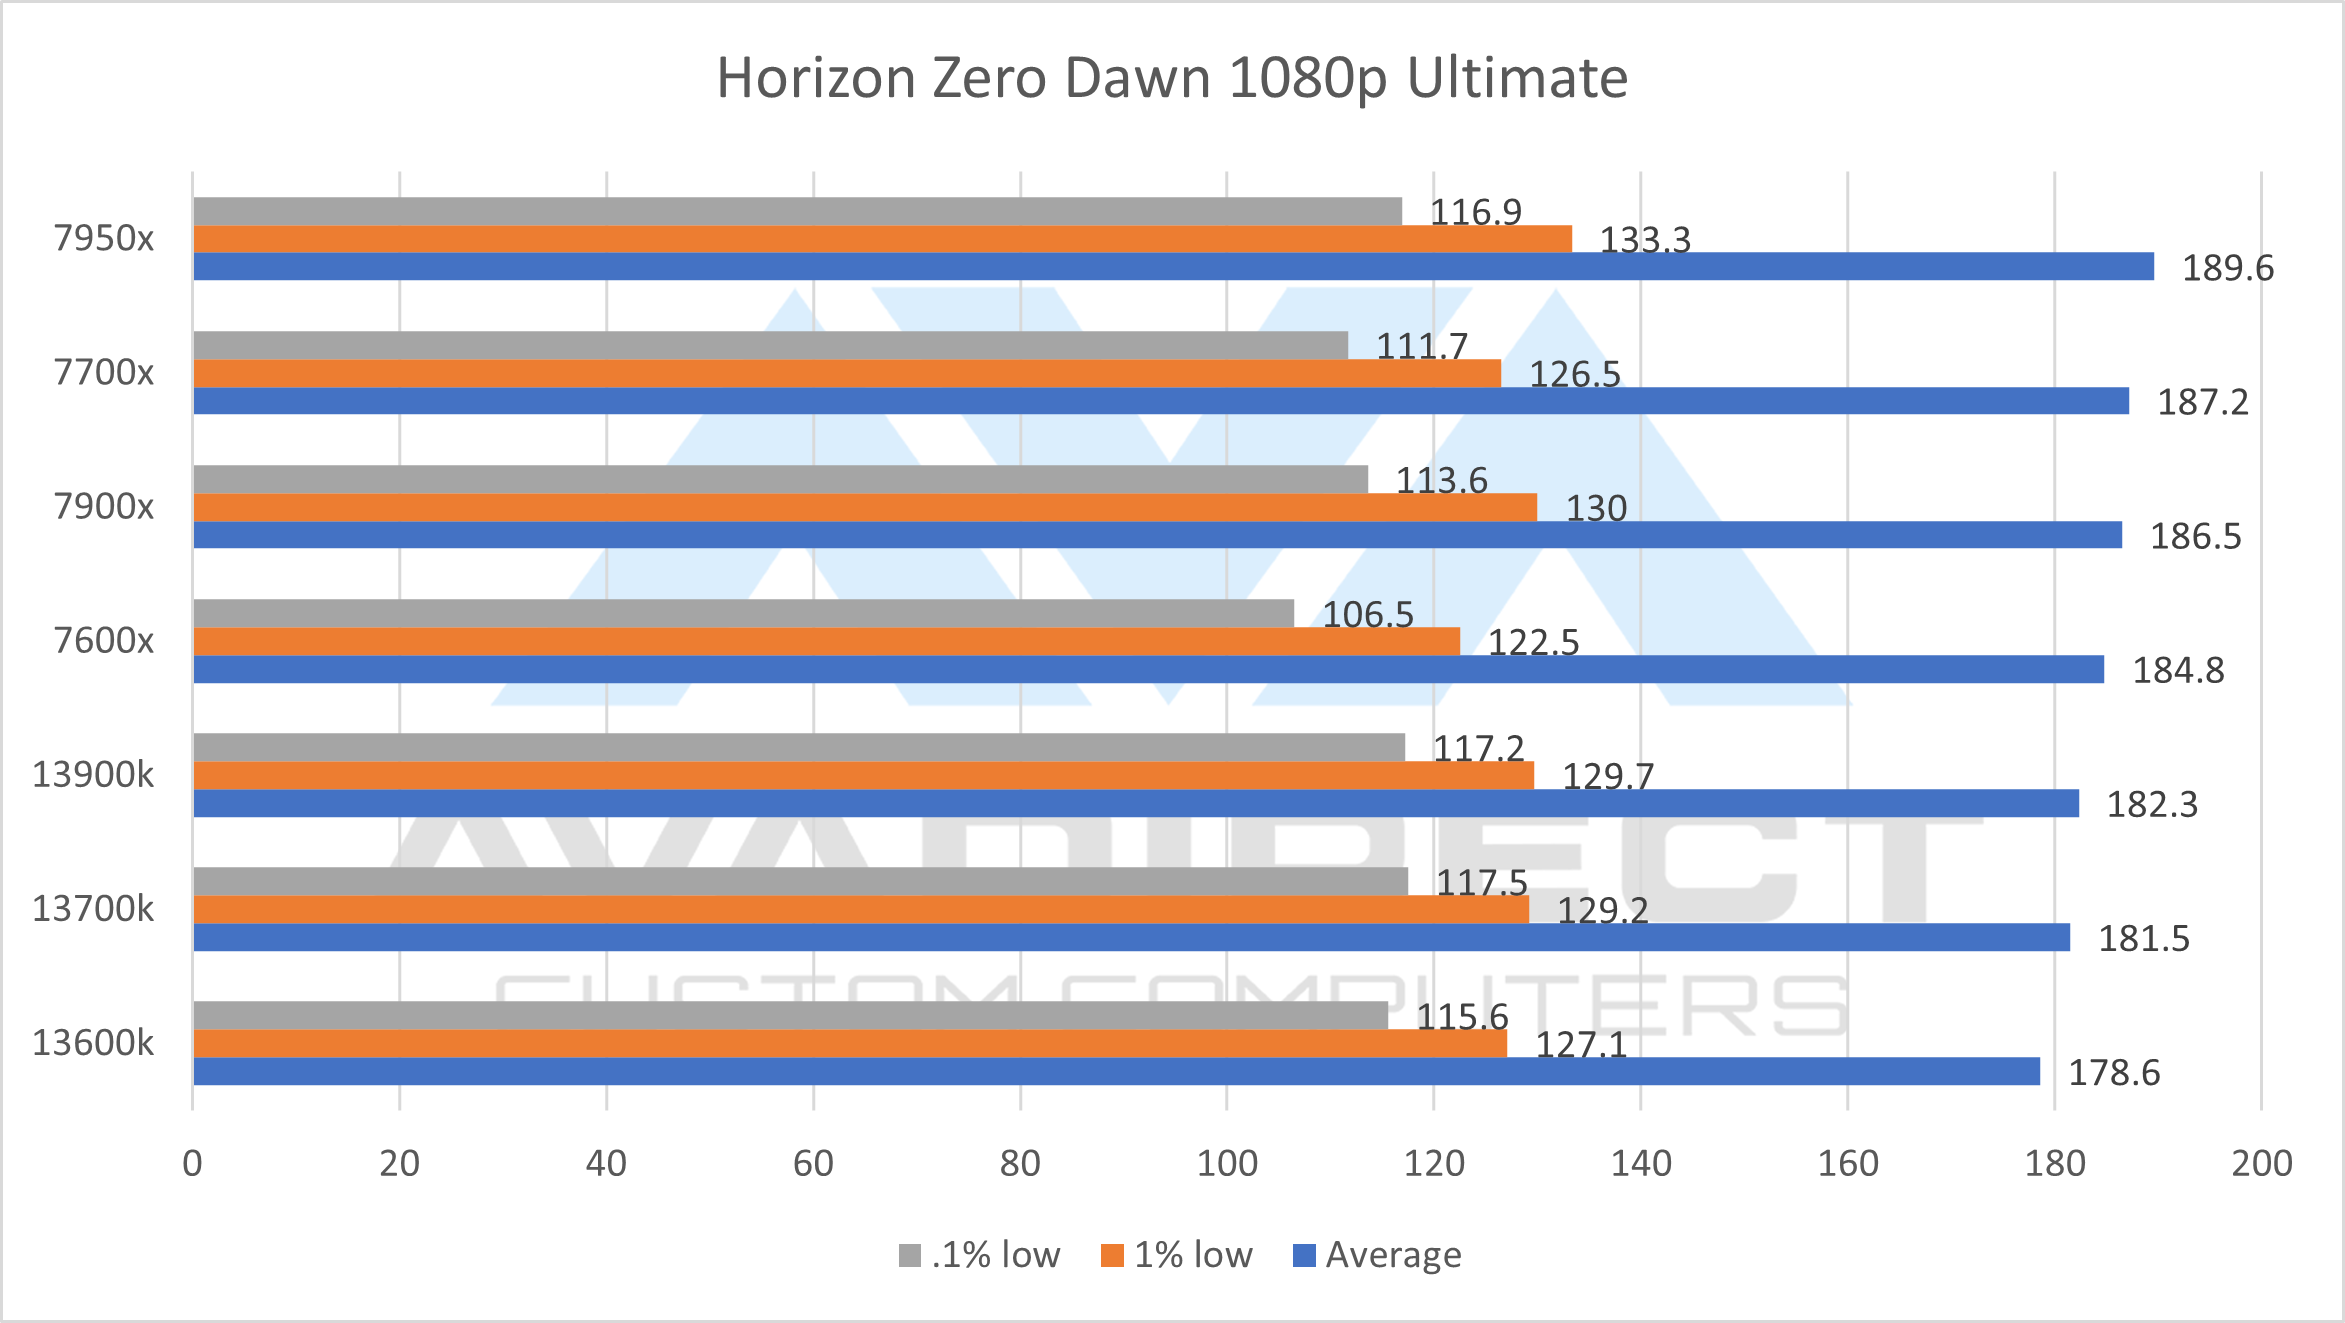 AMD vs Intel Gaming: Which is The Better processor (2023)